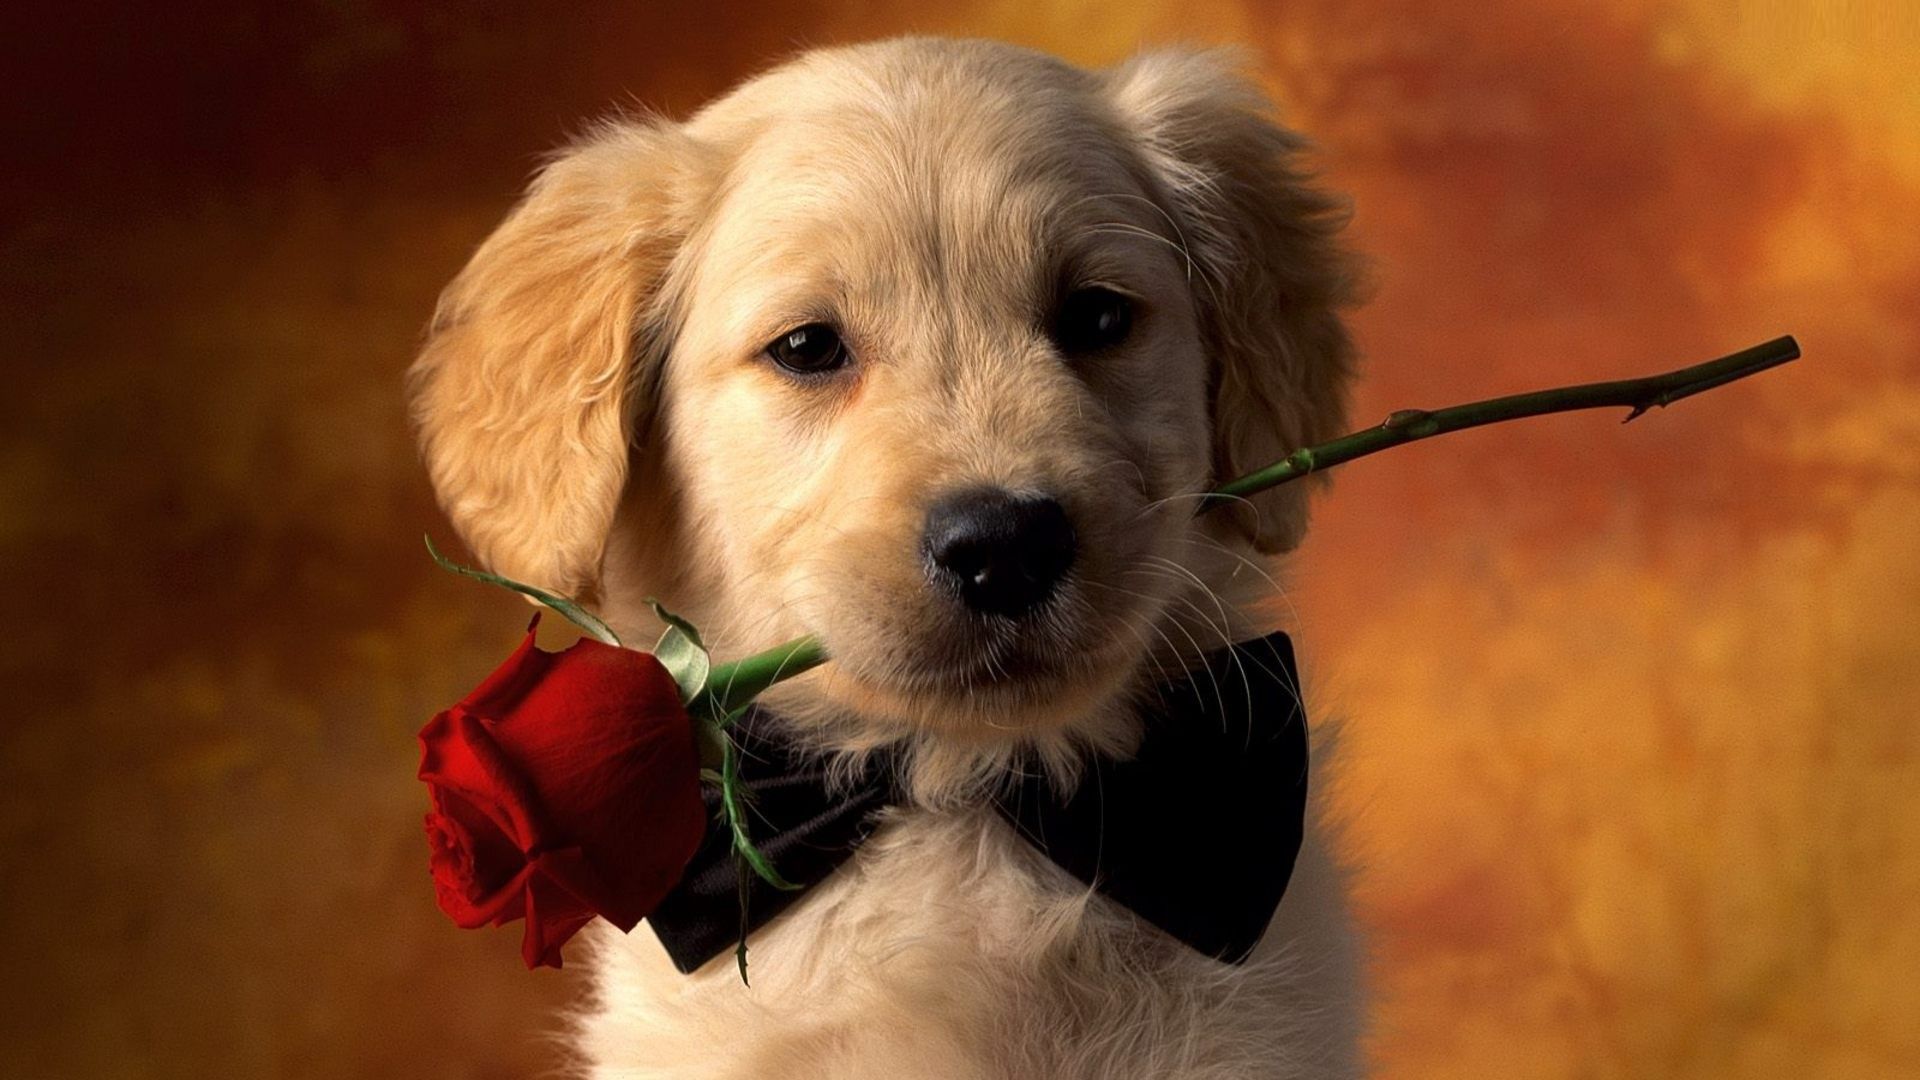 Dog with flower wallpaper download. Wallpaper, picture, photo